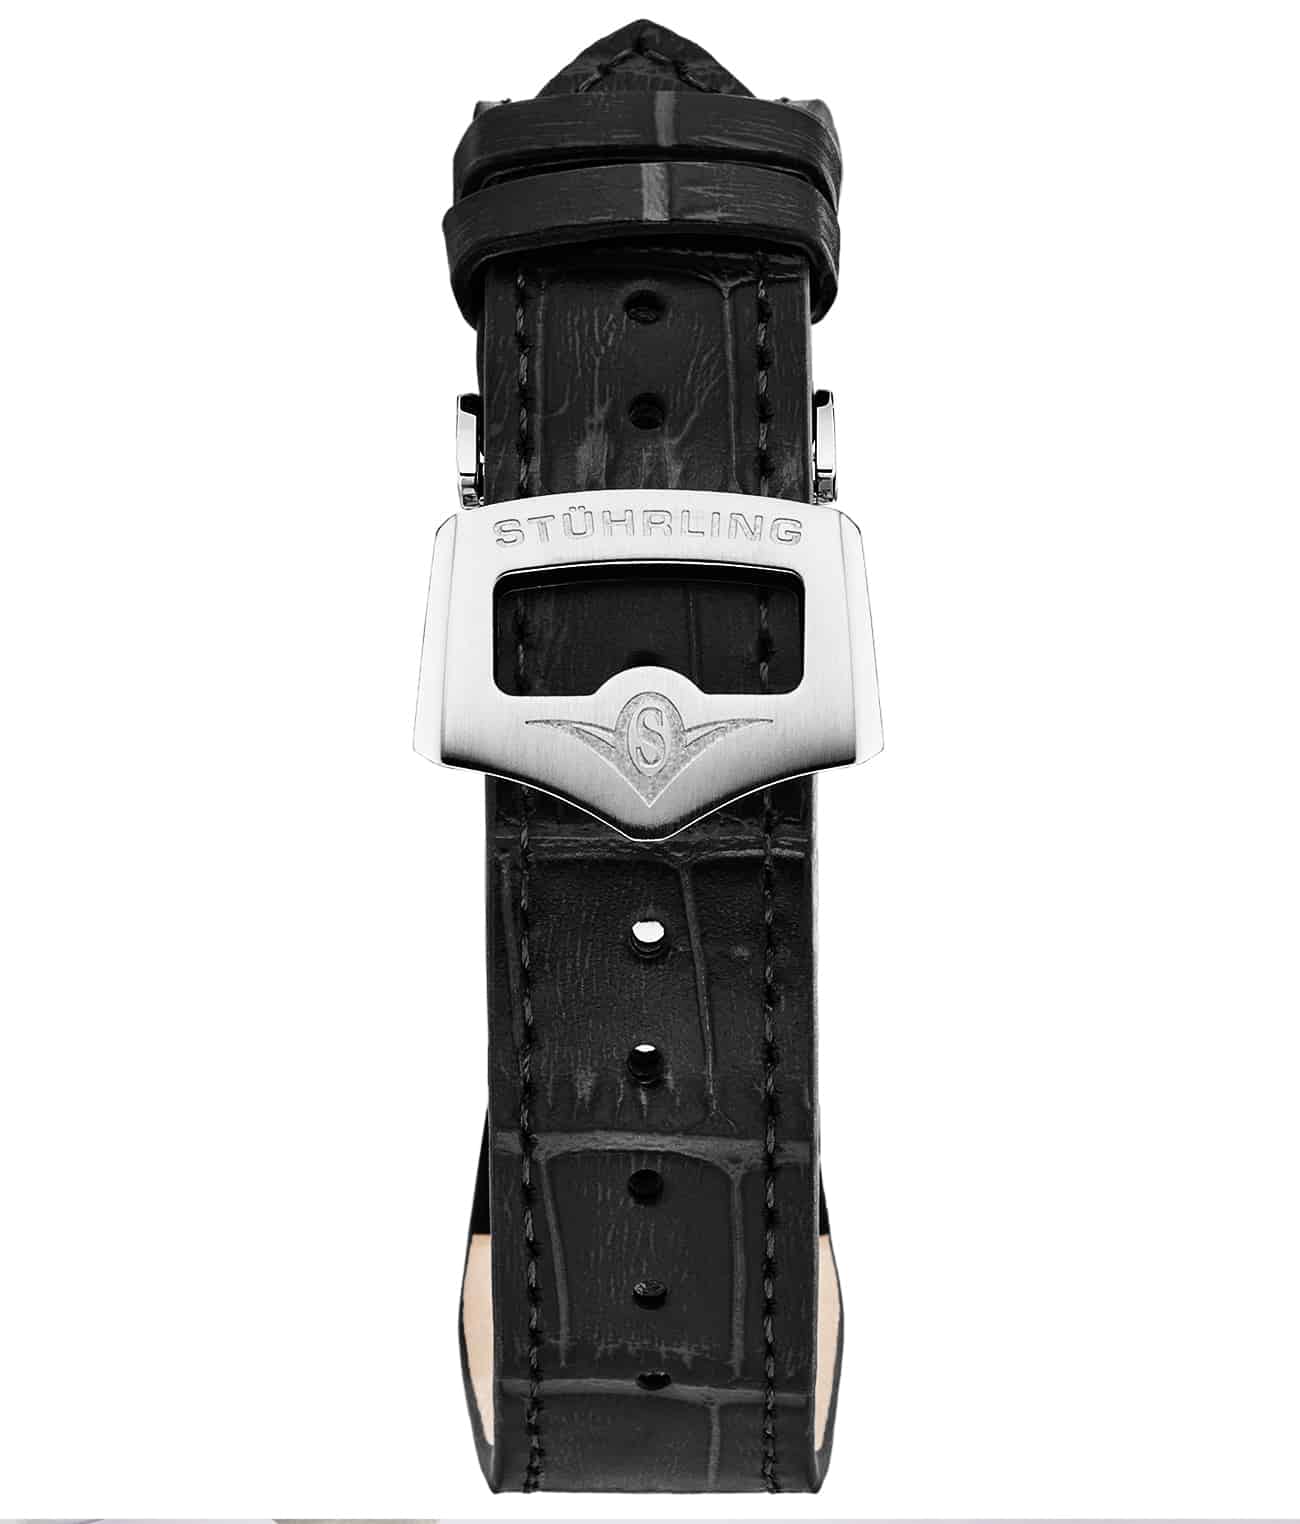 24mm Leather Strap with Stainless Steel Deployant Buckle